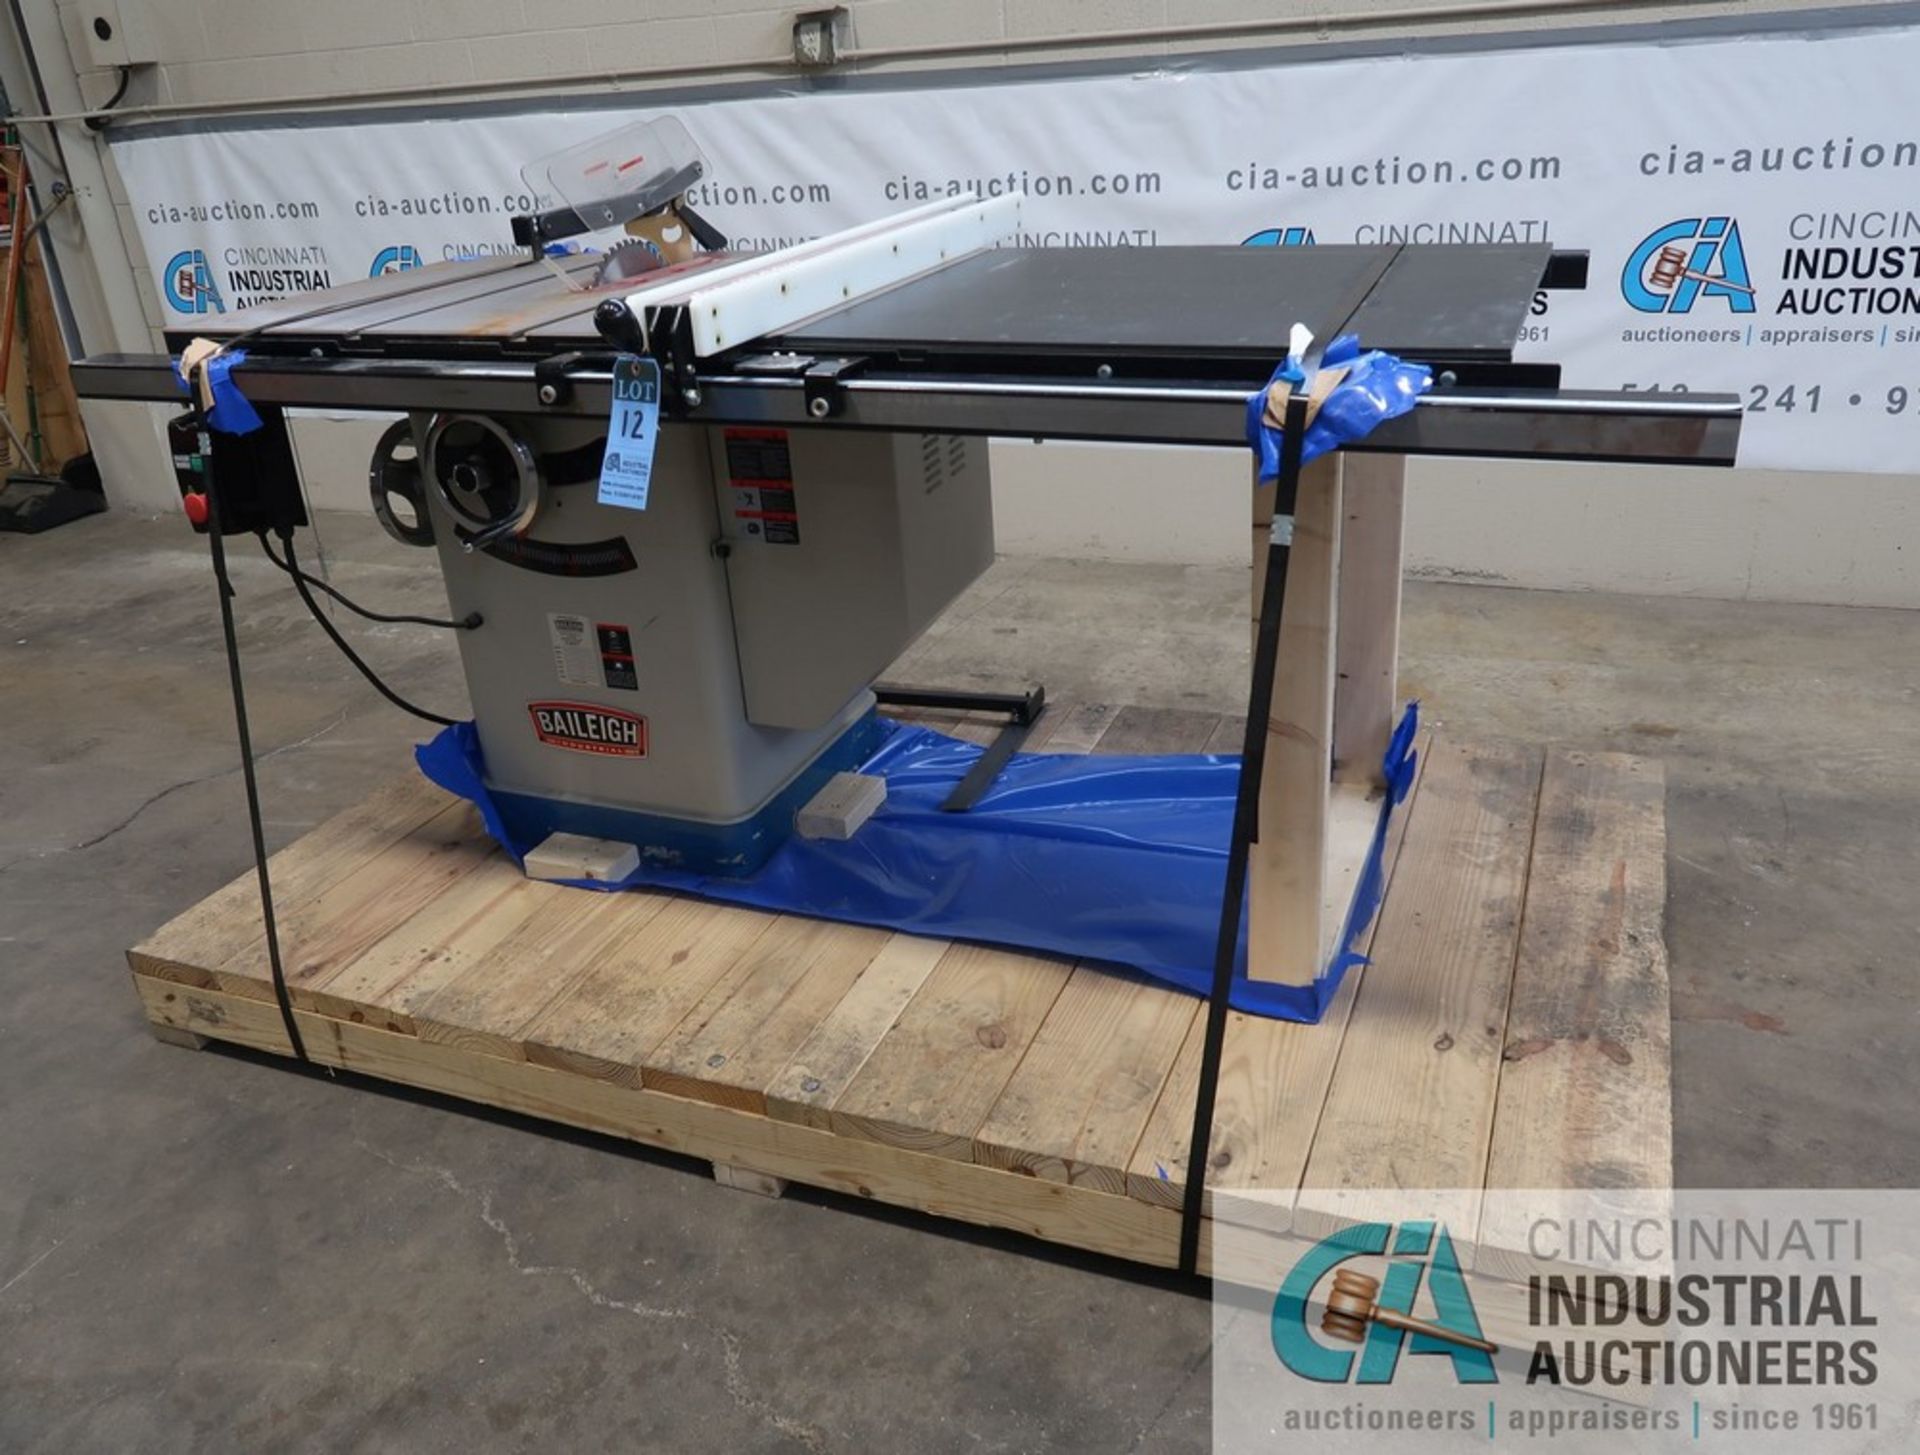 10" BAILEIGH MODEL TS-1040P050 TABLE SAW; S/N 170063-124 (NEW 9-2017), WITH T-SQUARE RIP FENCE - Image 2 of 8